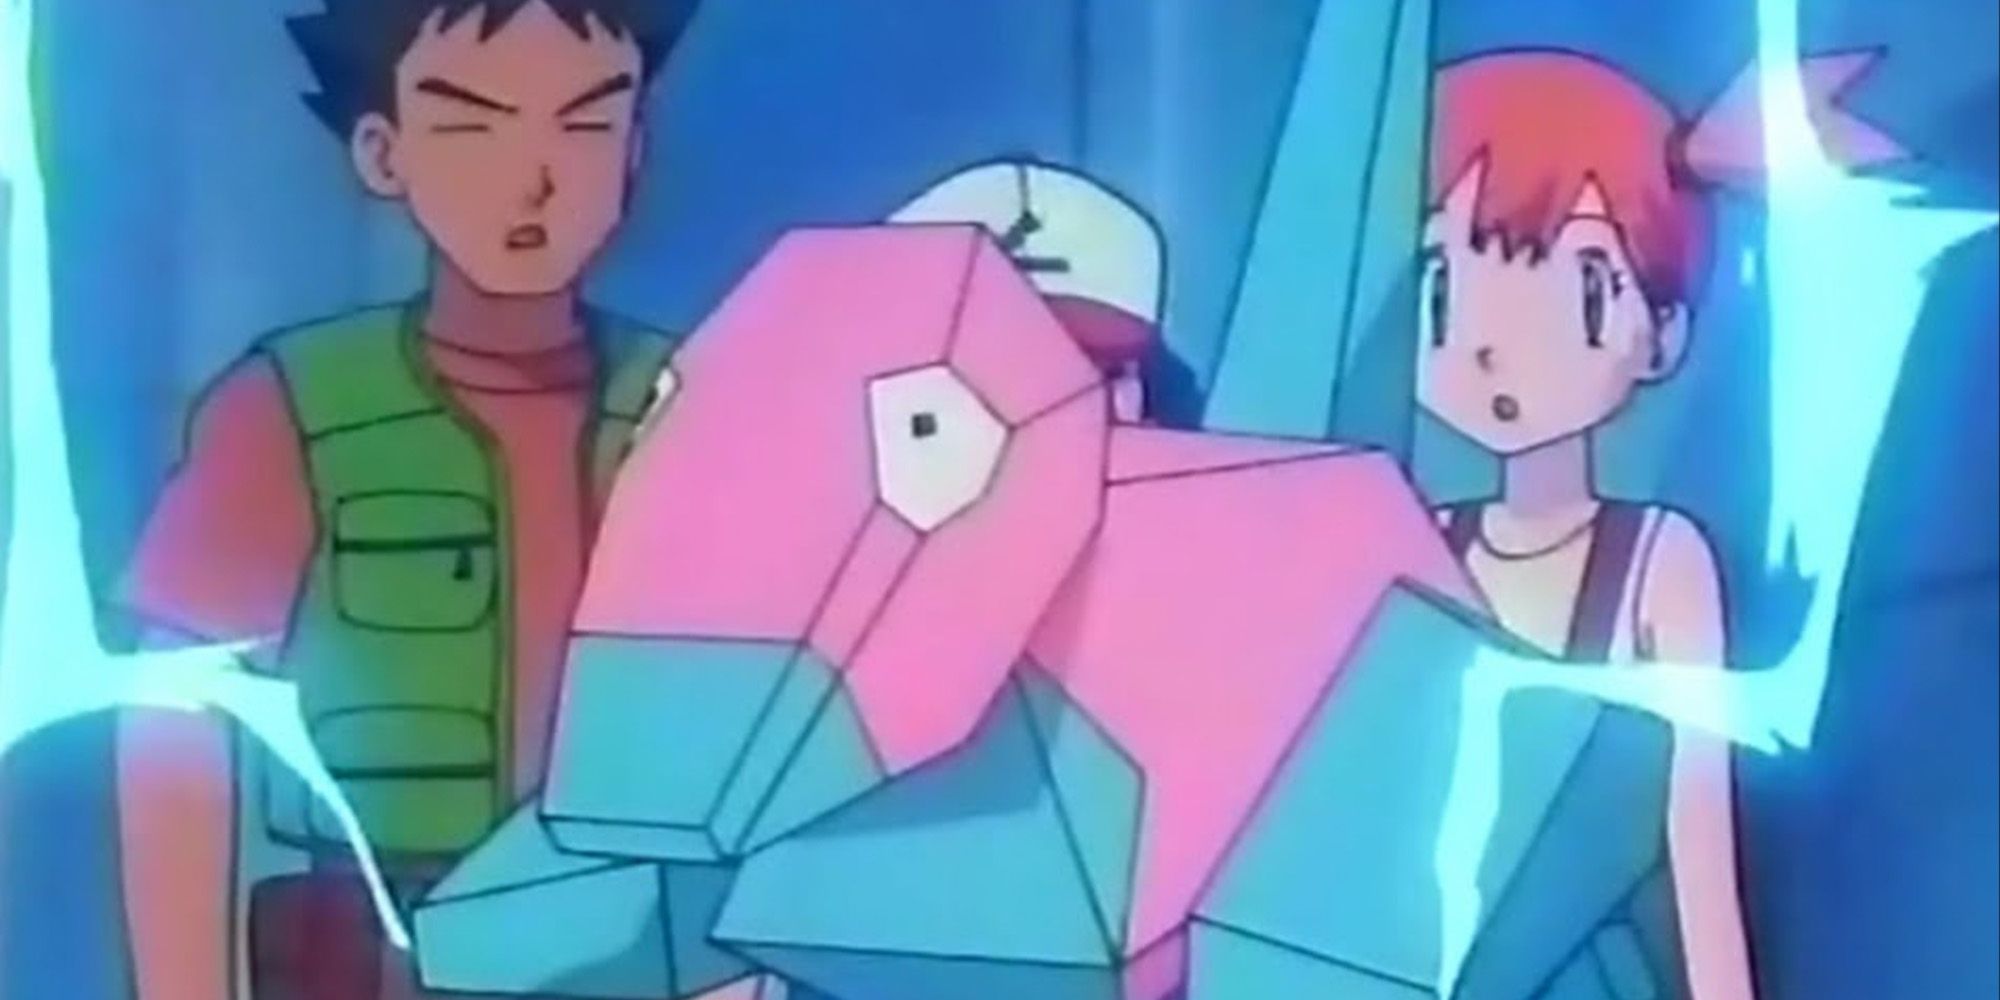 screenshot of Porygon with Brock, Ash, And Misty from the Pokémon Anime in the famous seizure episode